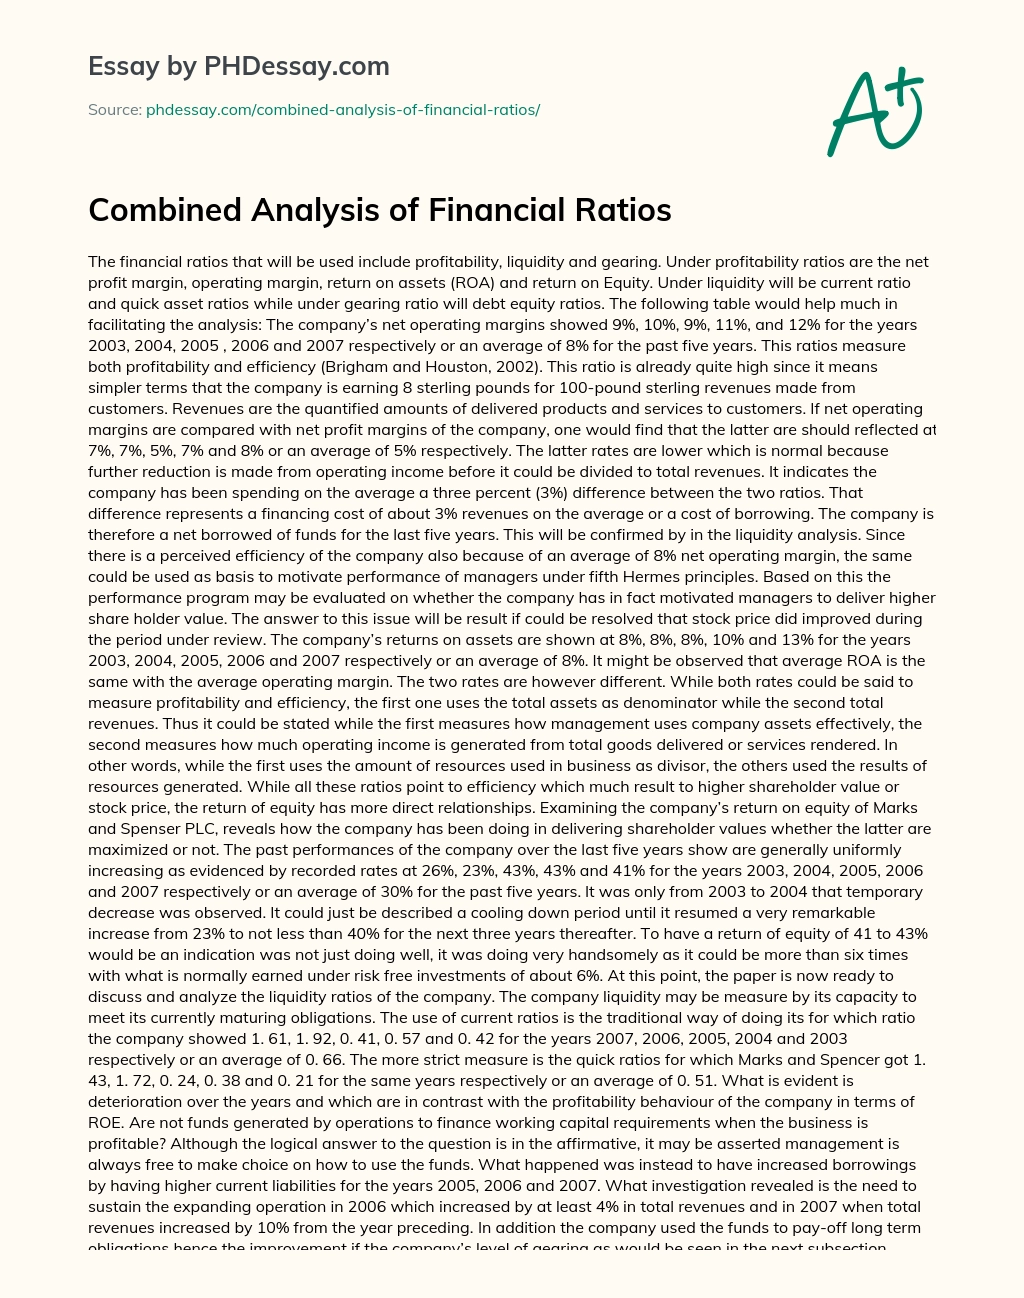 Combined Analysis of Financial Ratios essay